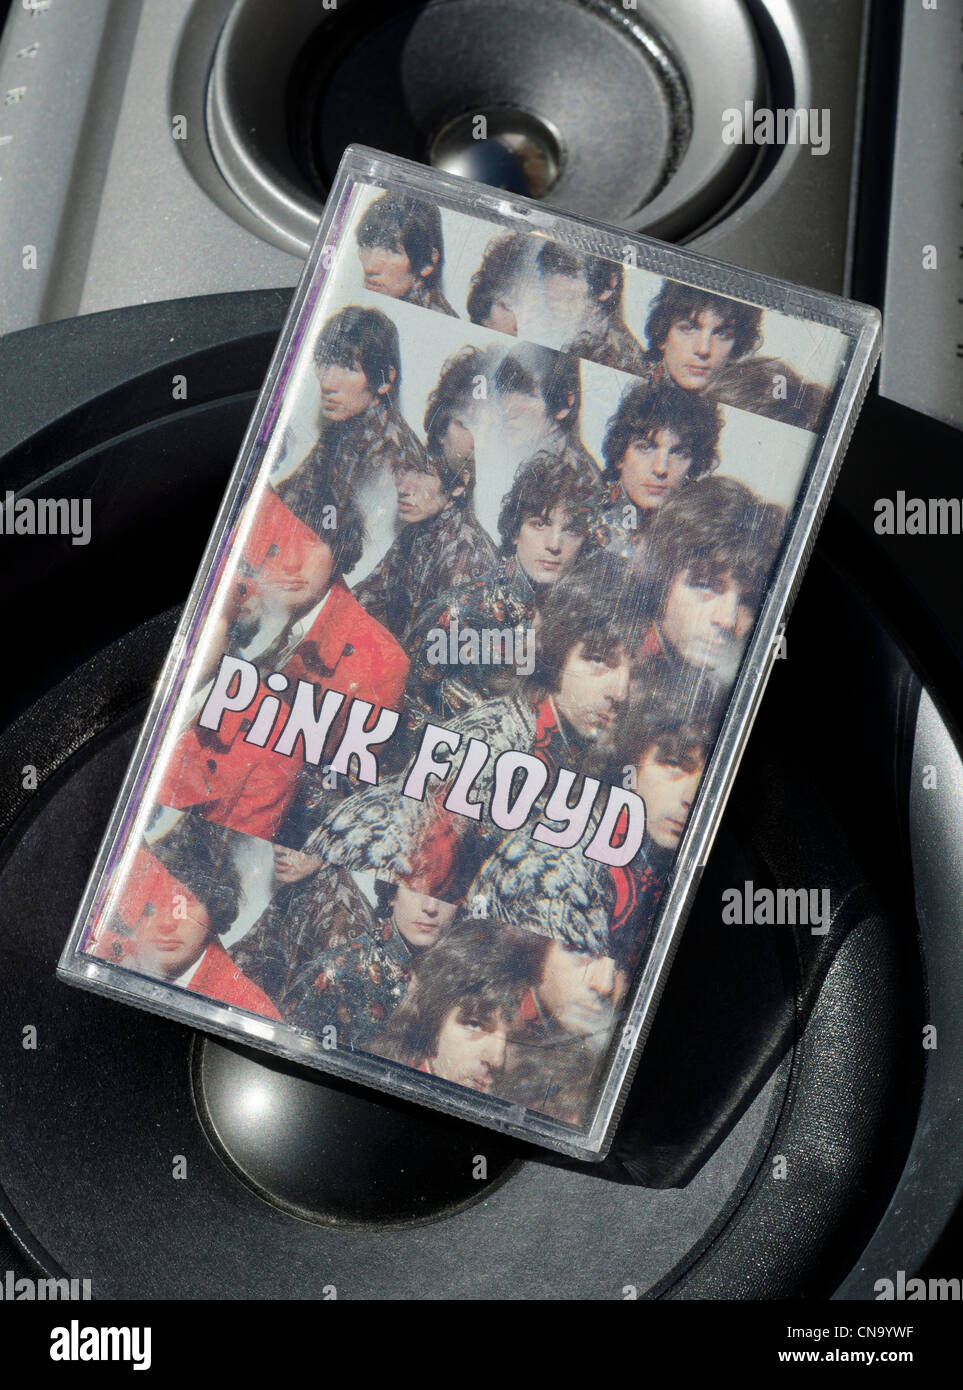 The Piper at the Gates of Dawn, Pink Floyd's Debut Album, On Audio Cassette, Released in August 1967. Stock Photo